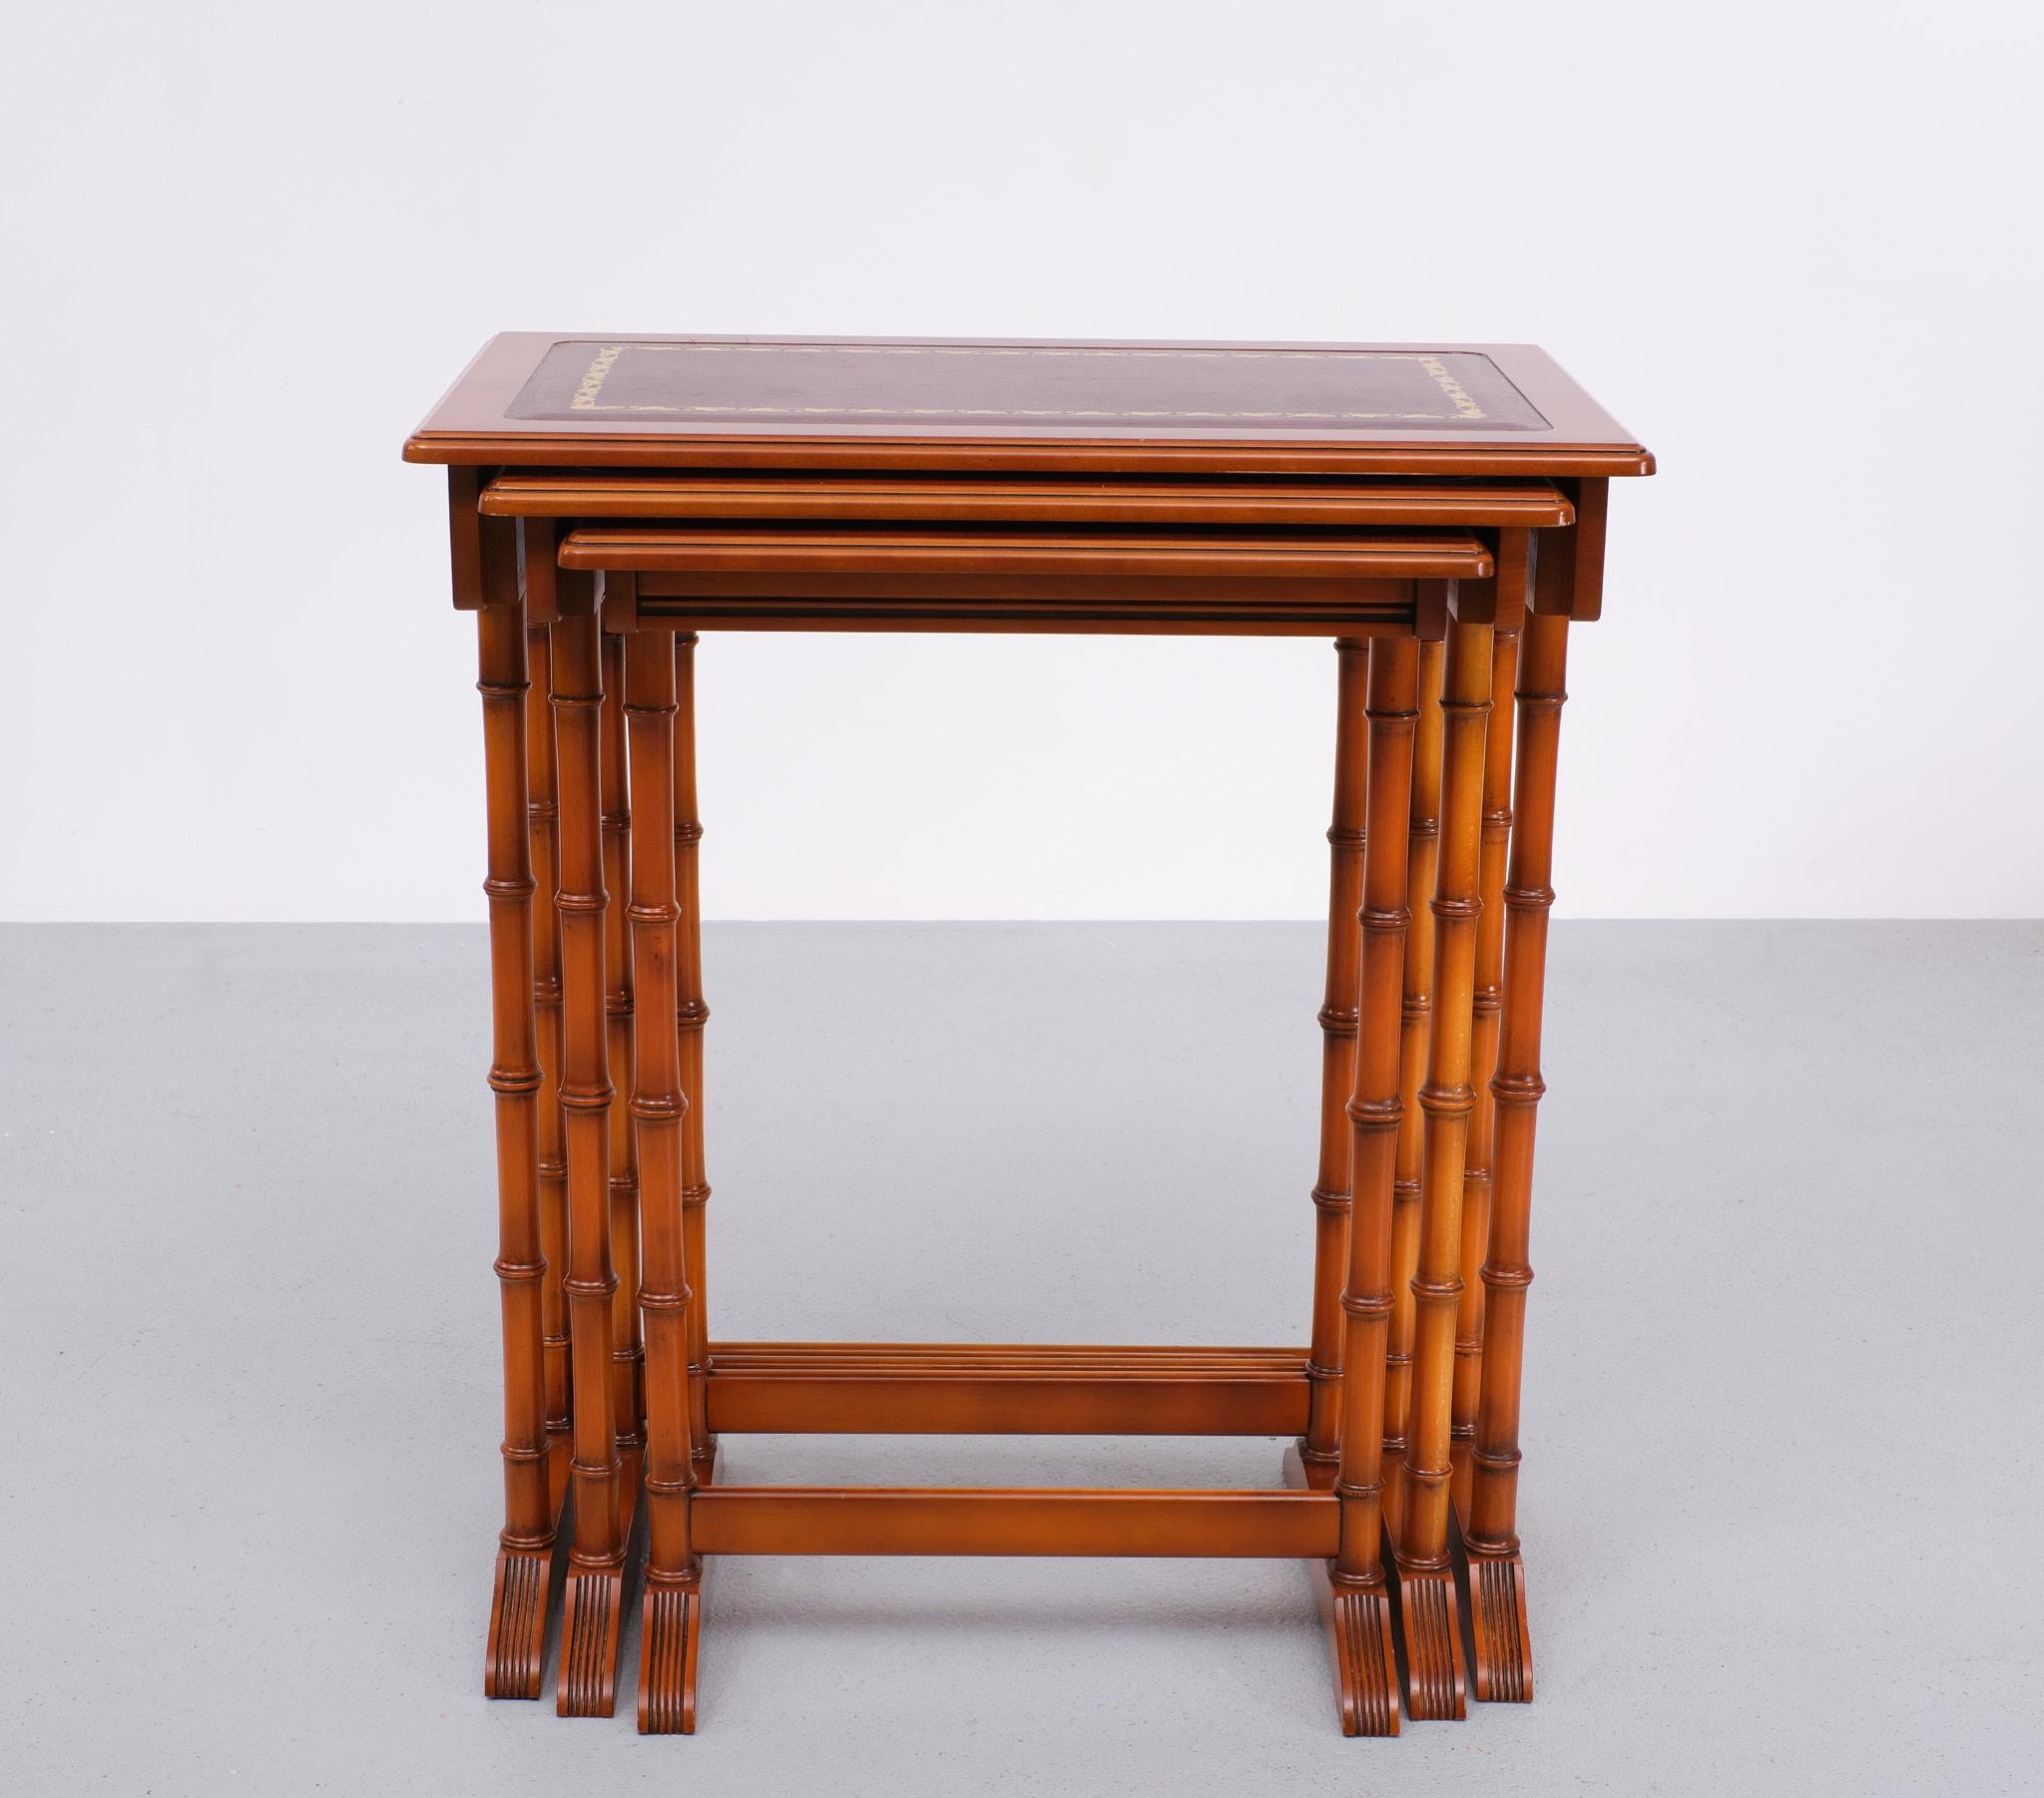   Exclusive English furniture  Cherry wood nesting tables  1970s  For Sale 4